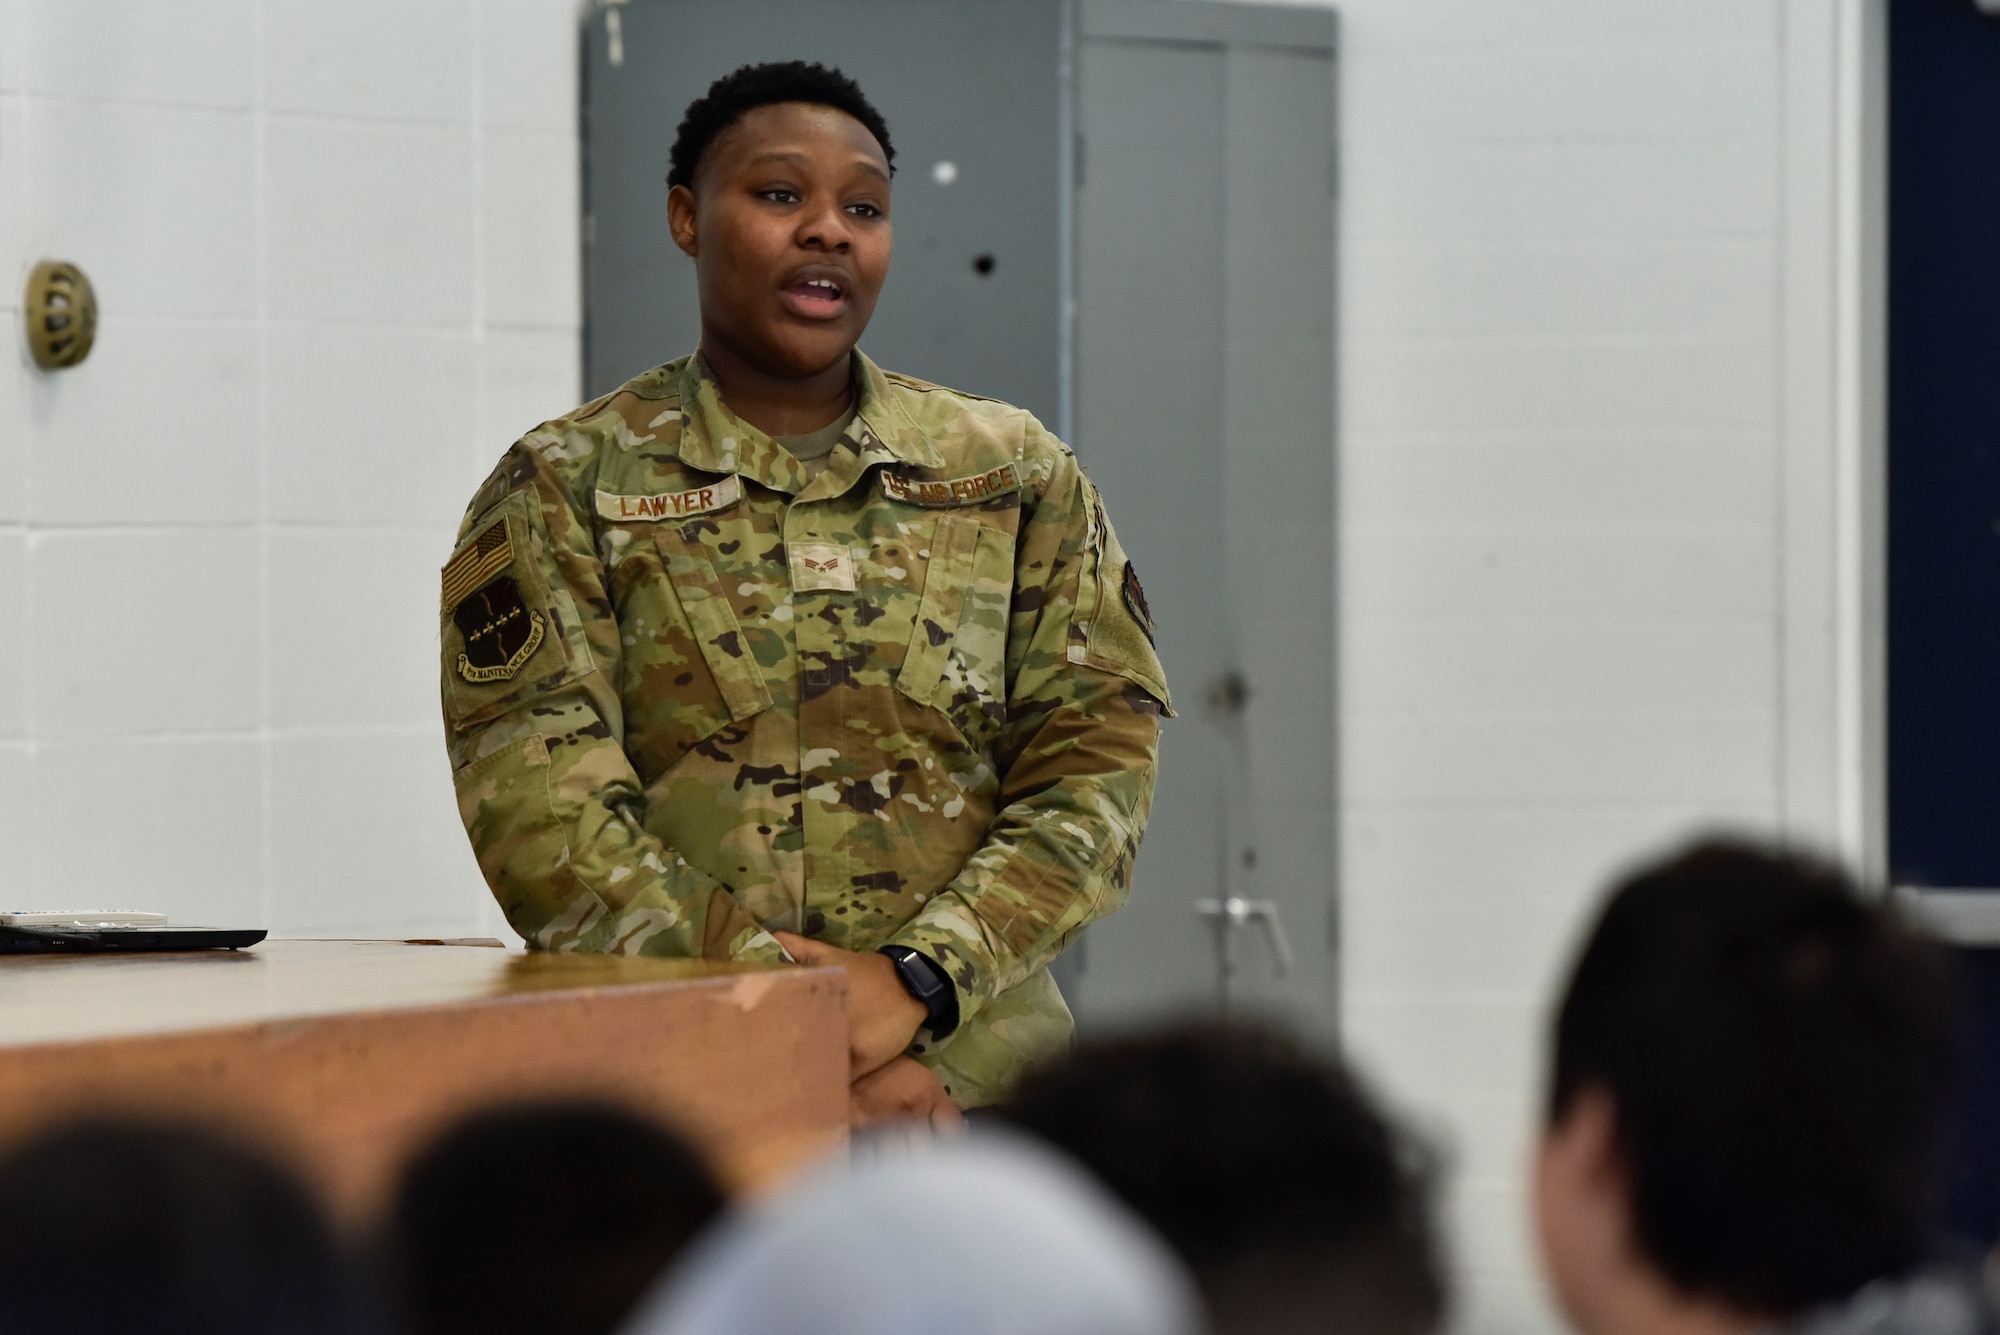 U.S. Air Force Senior Airman Labrianna Lawyer, 9th Maintenance Group weapons system controller, explains the military rank structure to Redwood Middle School students in Napa Valley, California, Jan. 25, 2023.